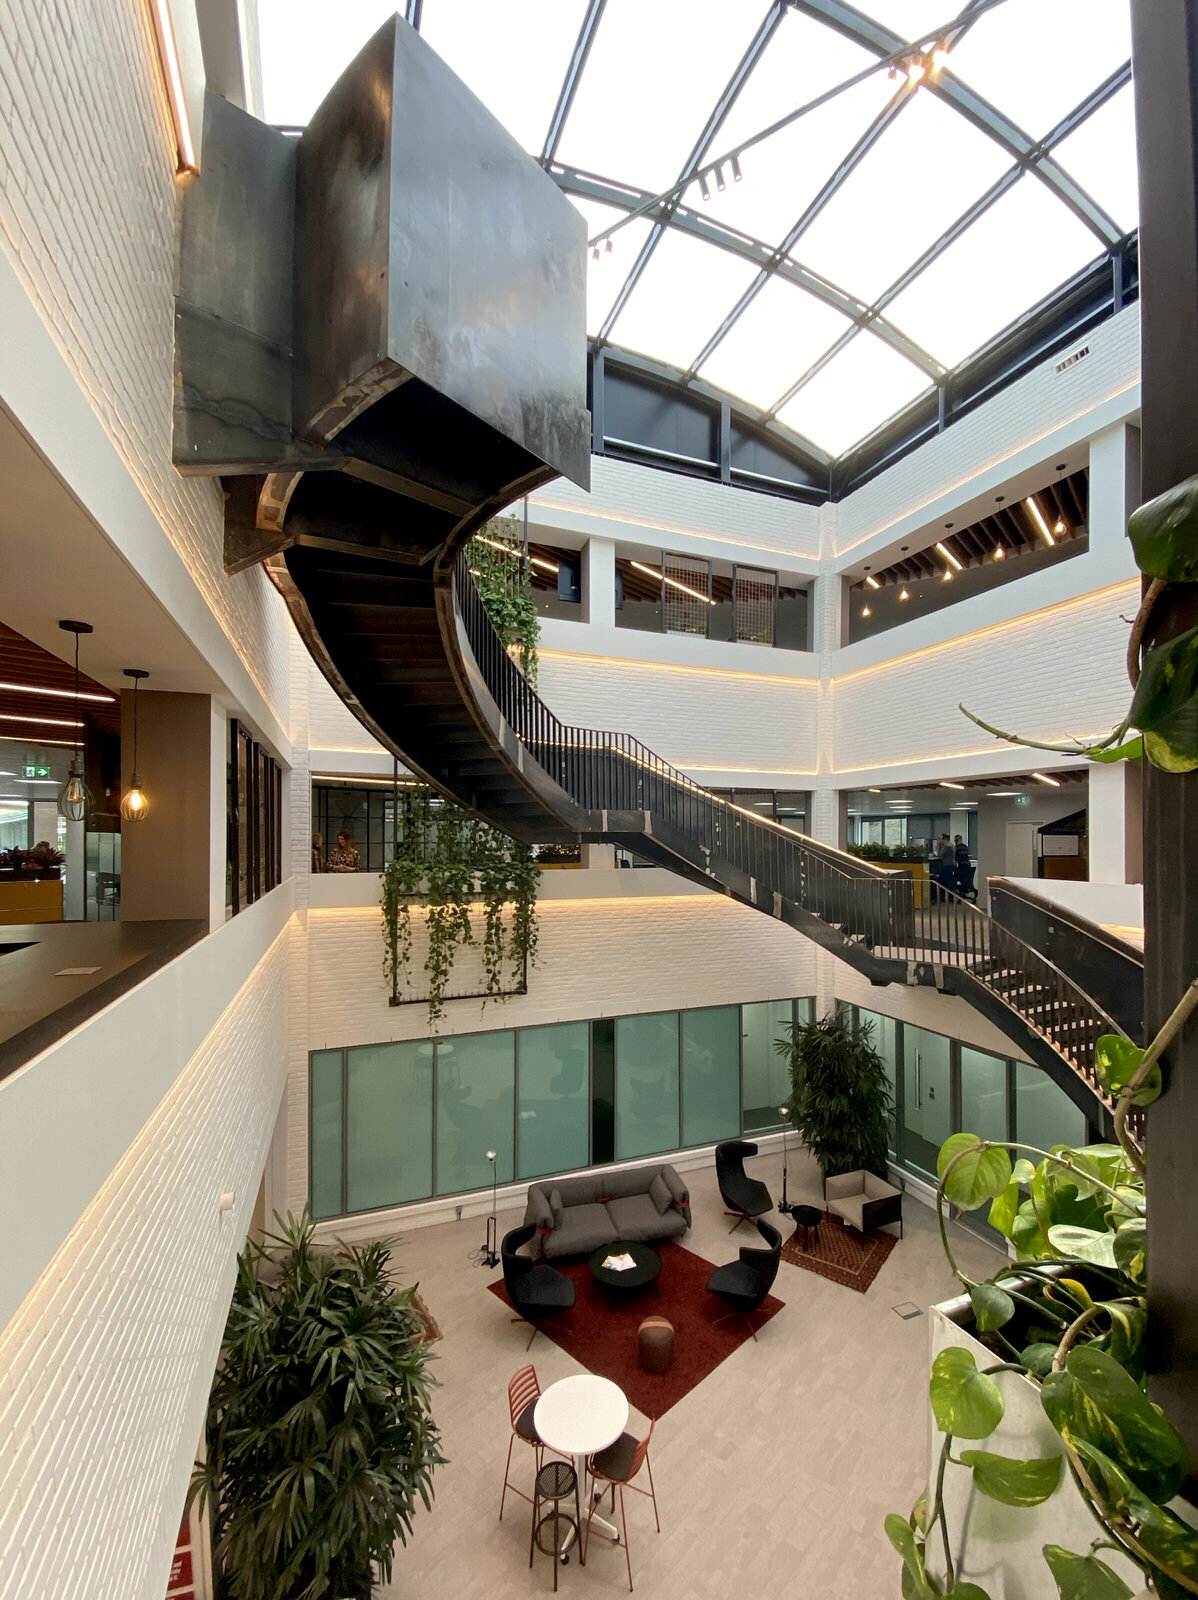 BJB WD40 (07) Wide angle view of atrium and stair.jpg